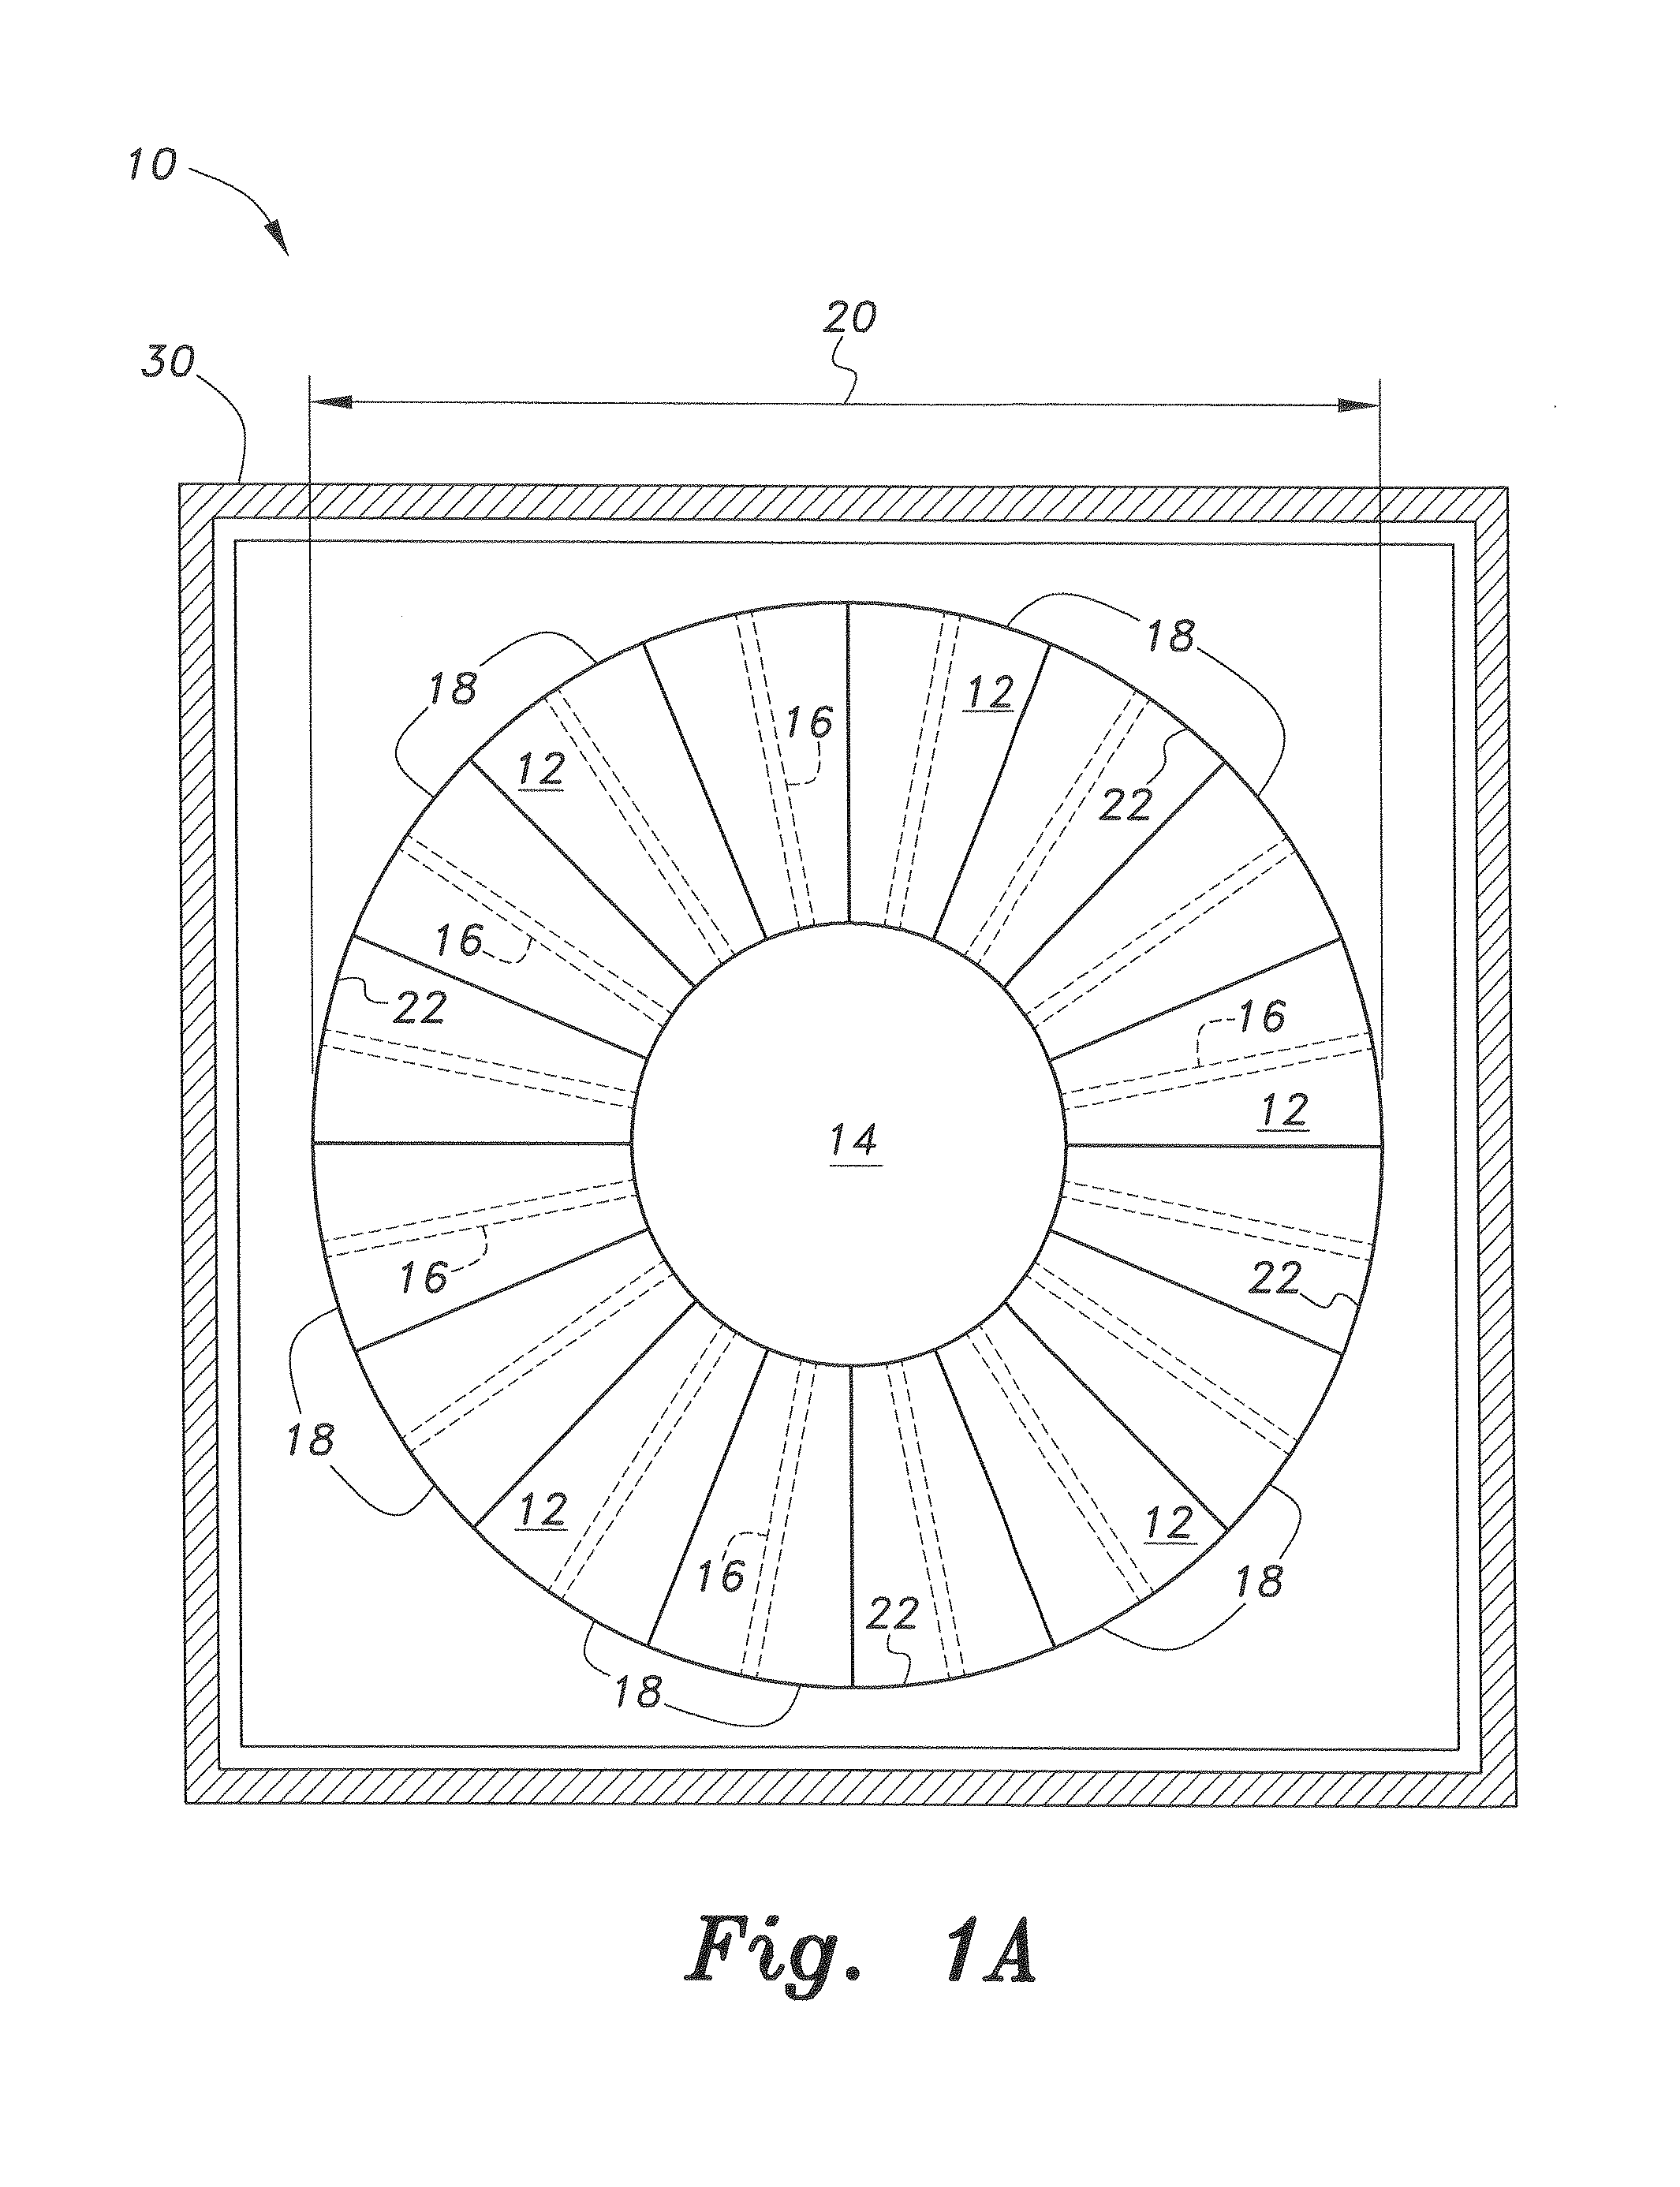 Ventilation fan with automatic blade closure mechanism